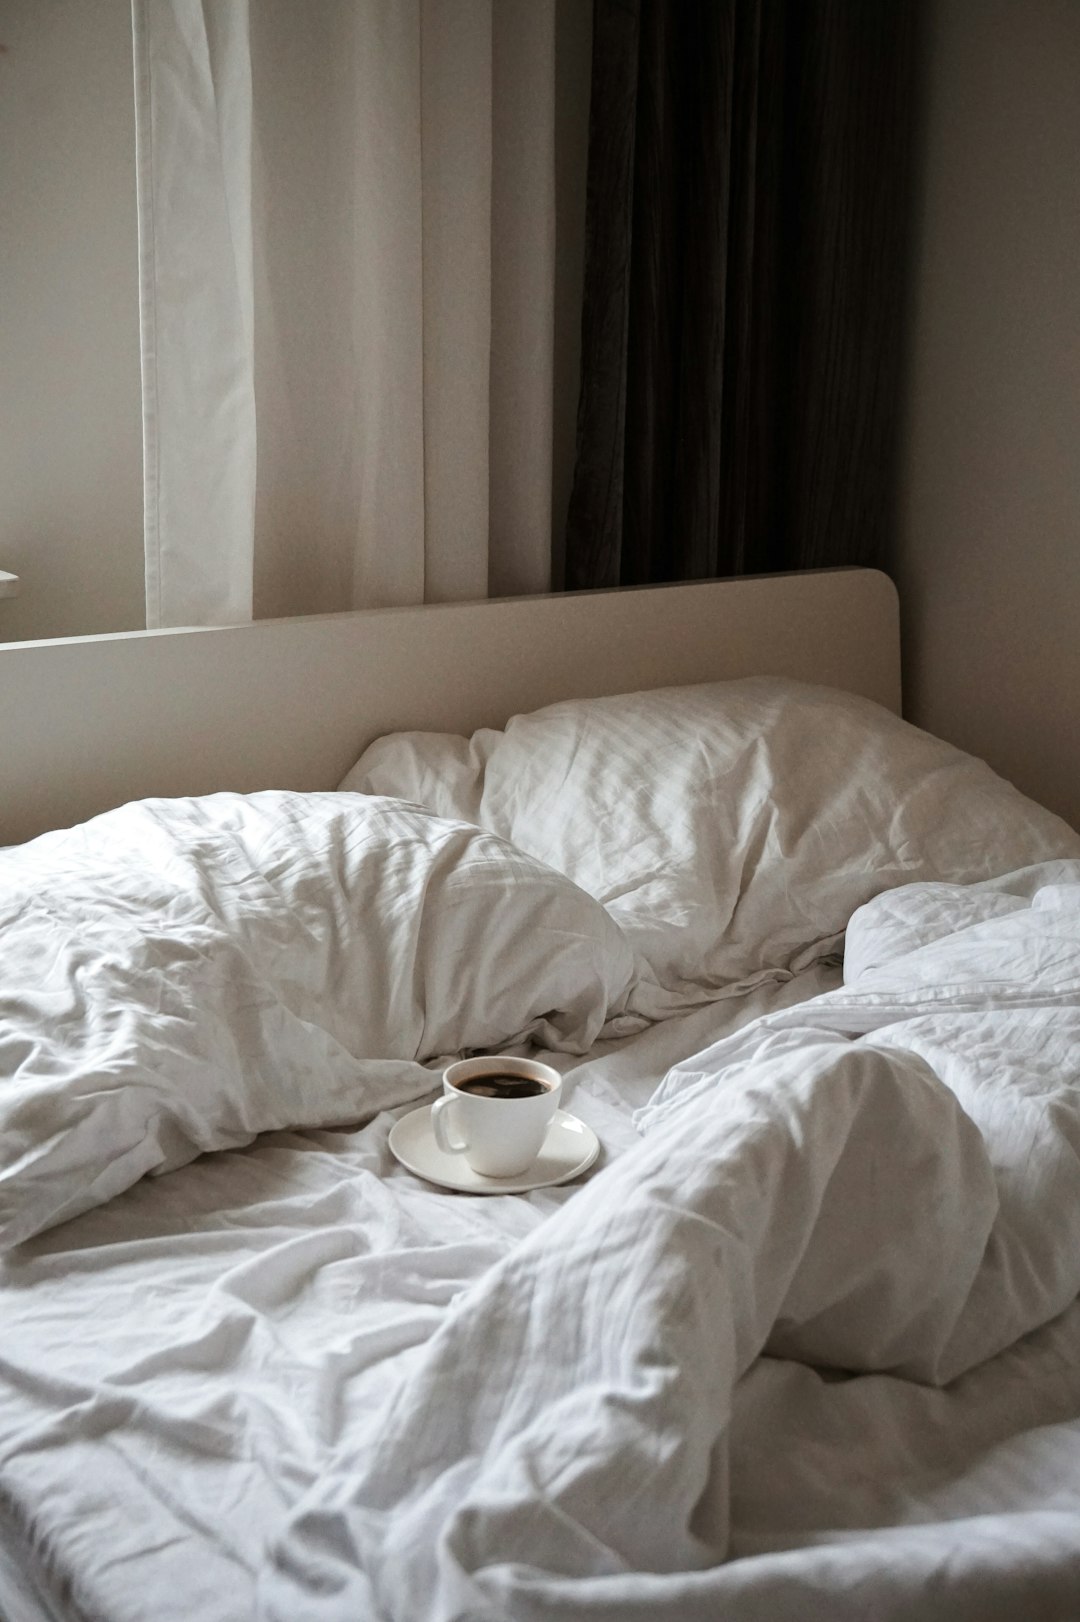  coffee on cup on bed bed